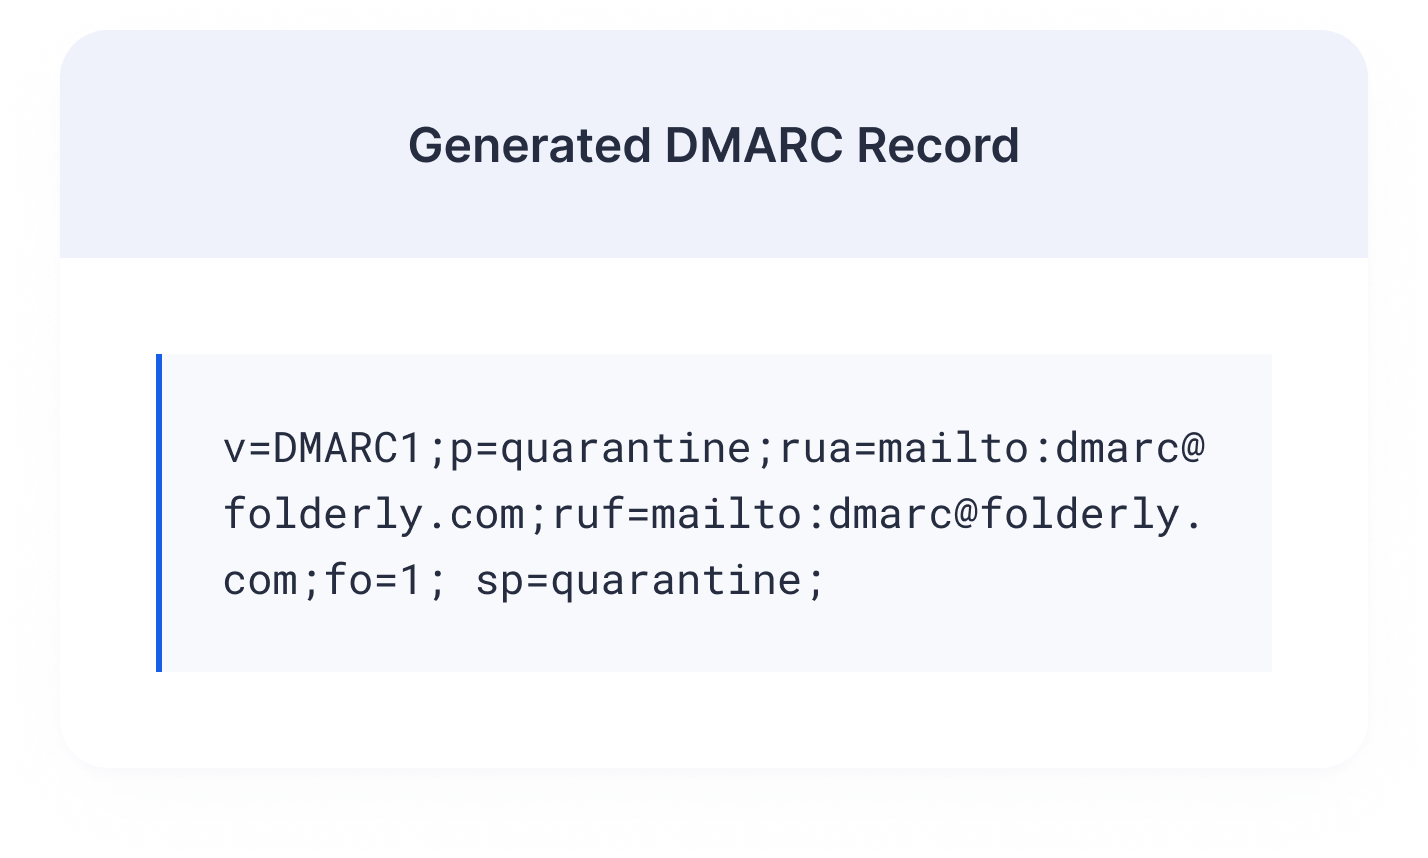 What is DMARC?